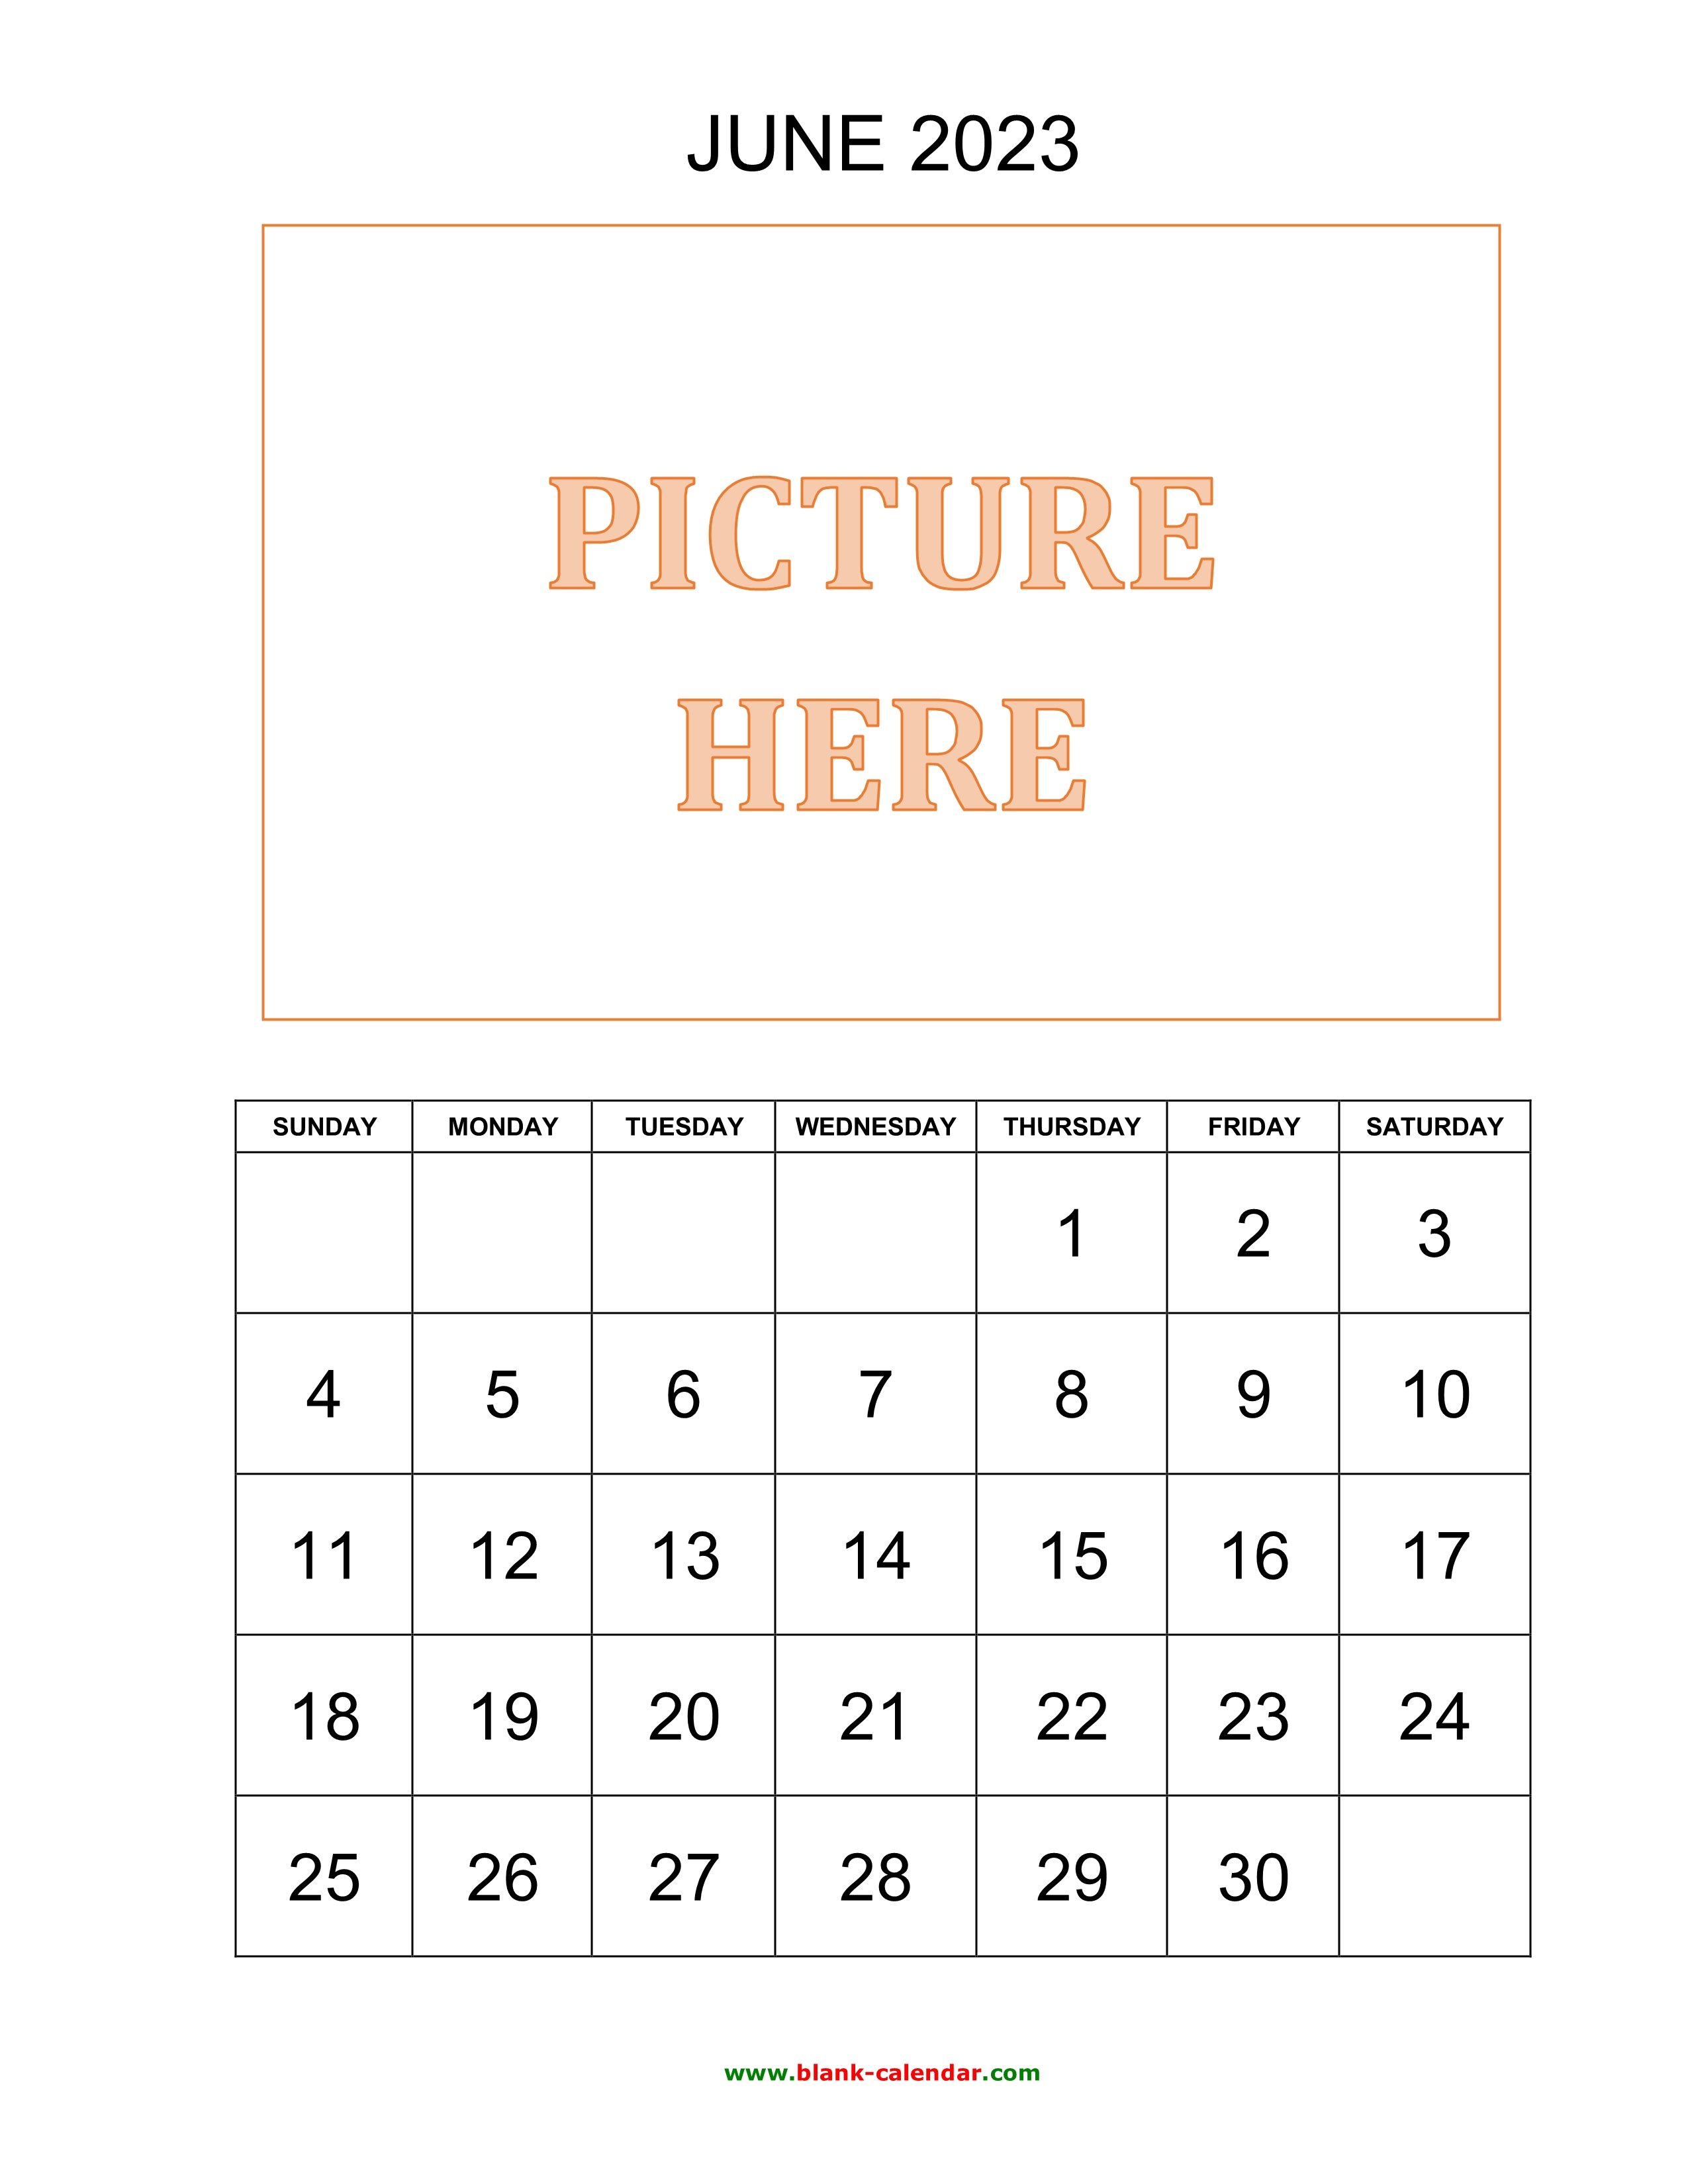 Free Download Printable June 2023 Calendar, pictures can be placed at the top